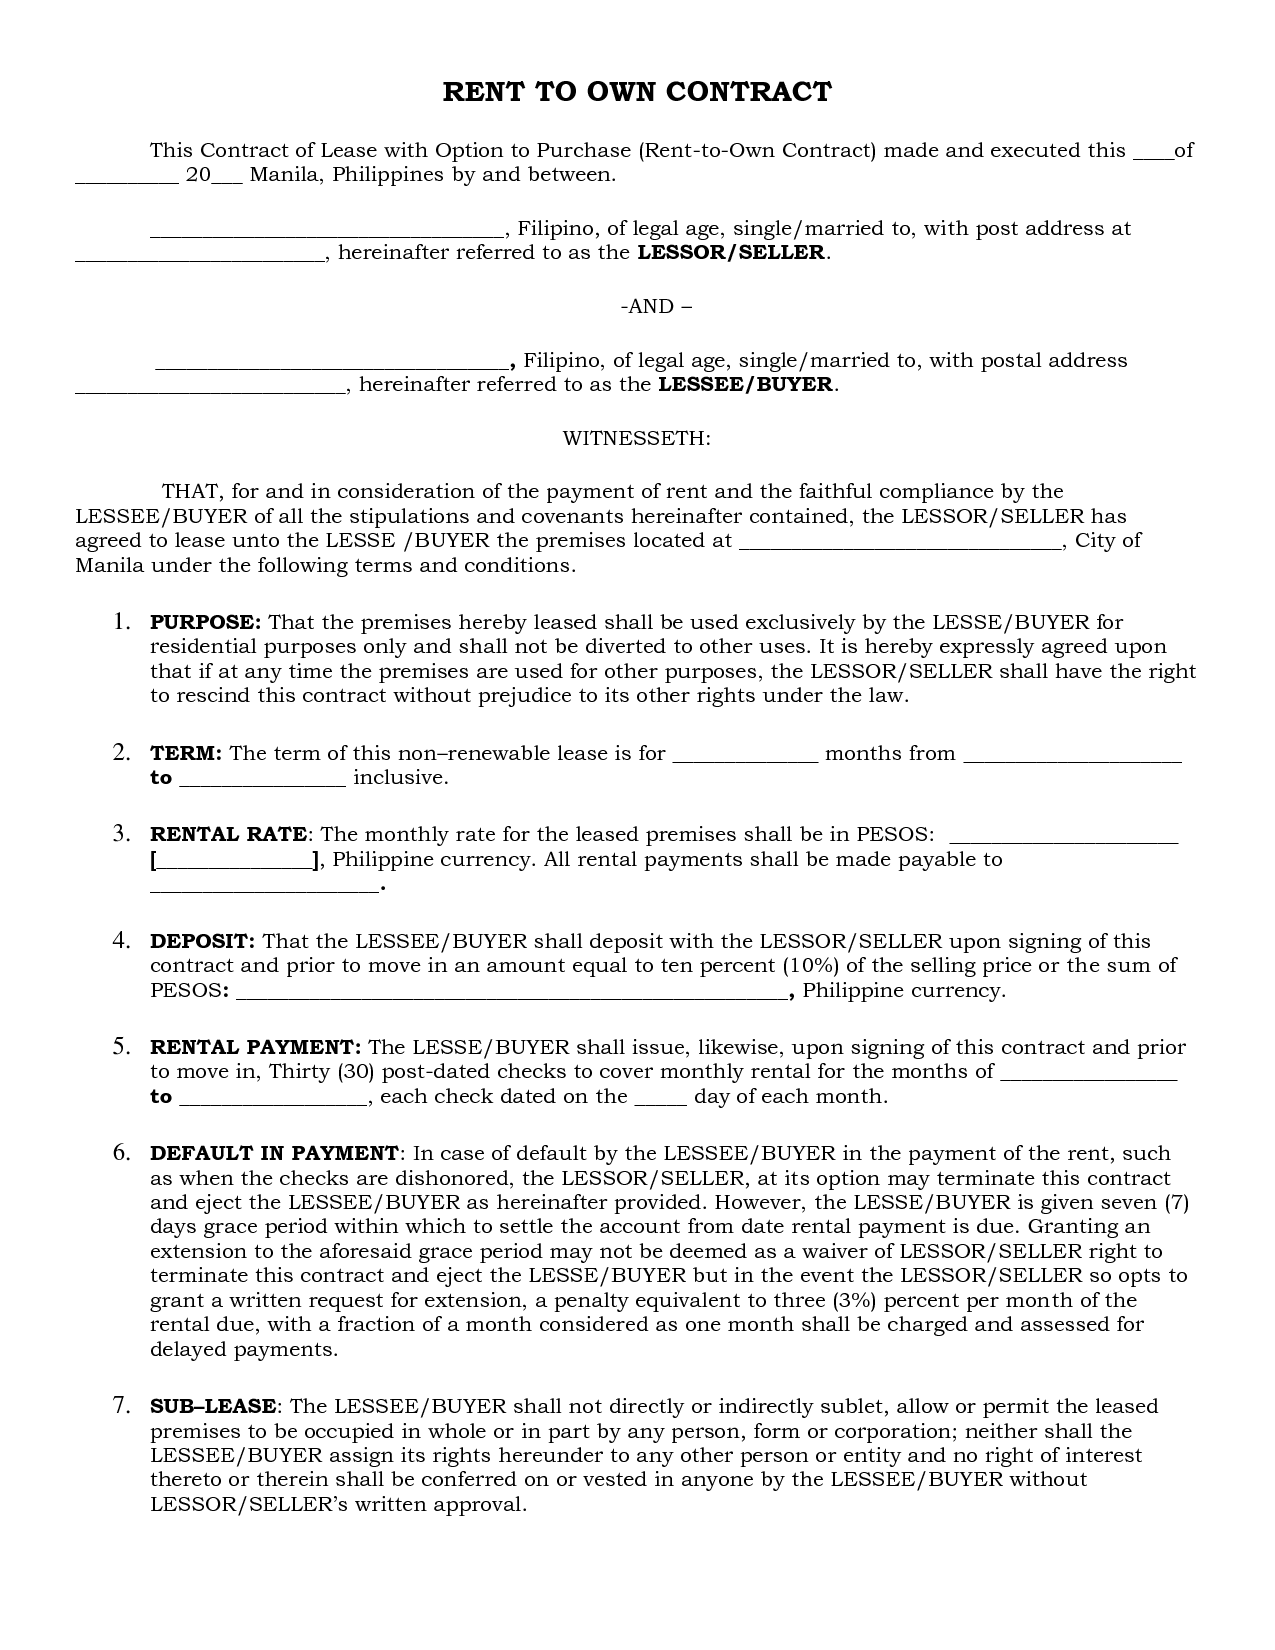 sample-rent-to-own-lease-agreement-free-printable-documents